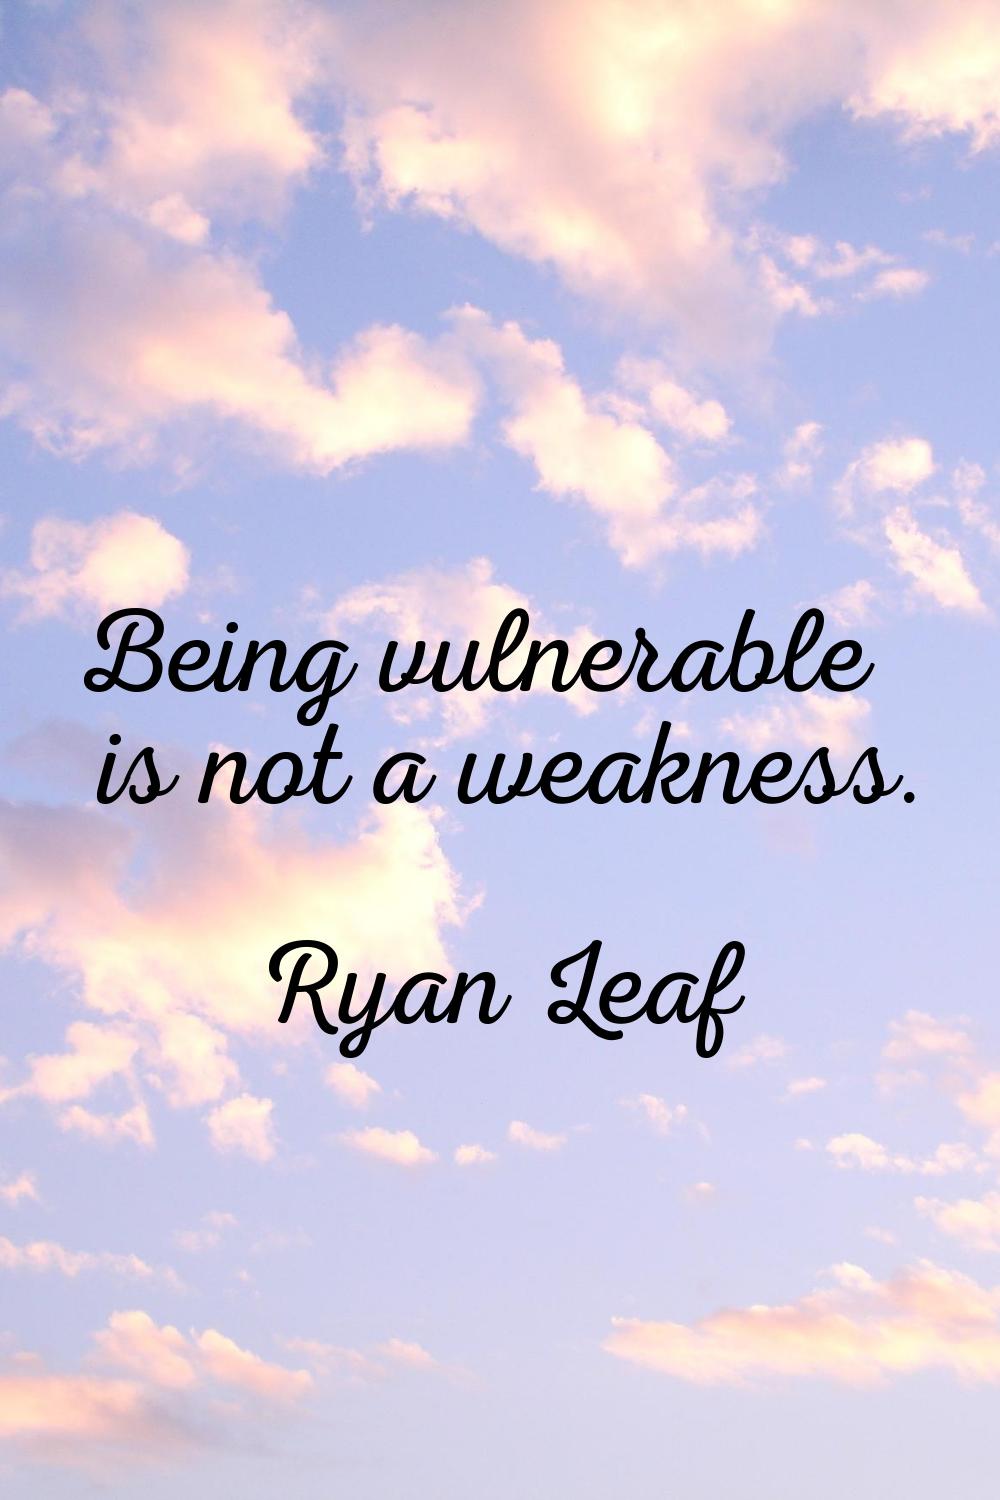 Being vulnerable is not a weakness.